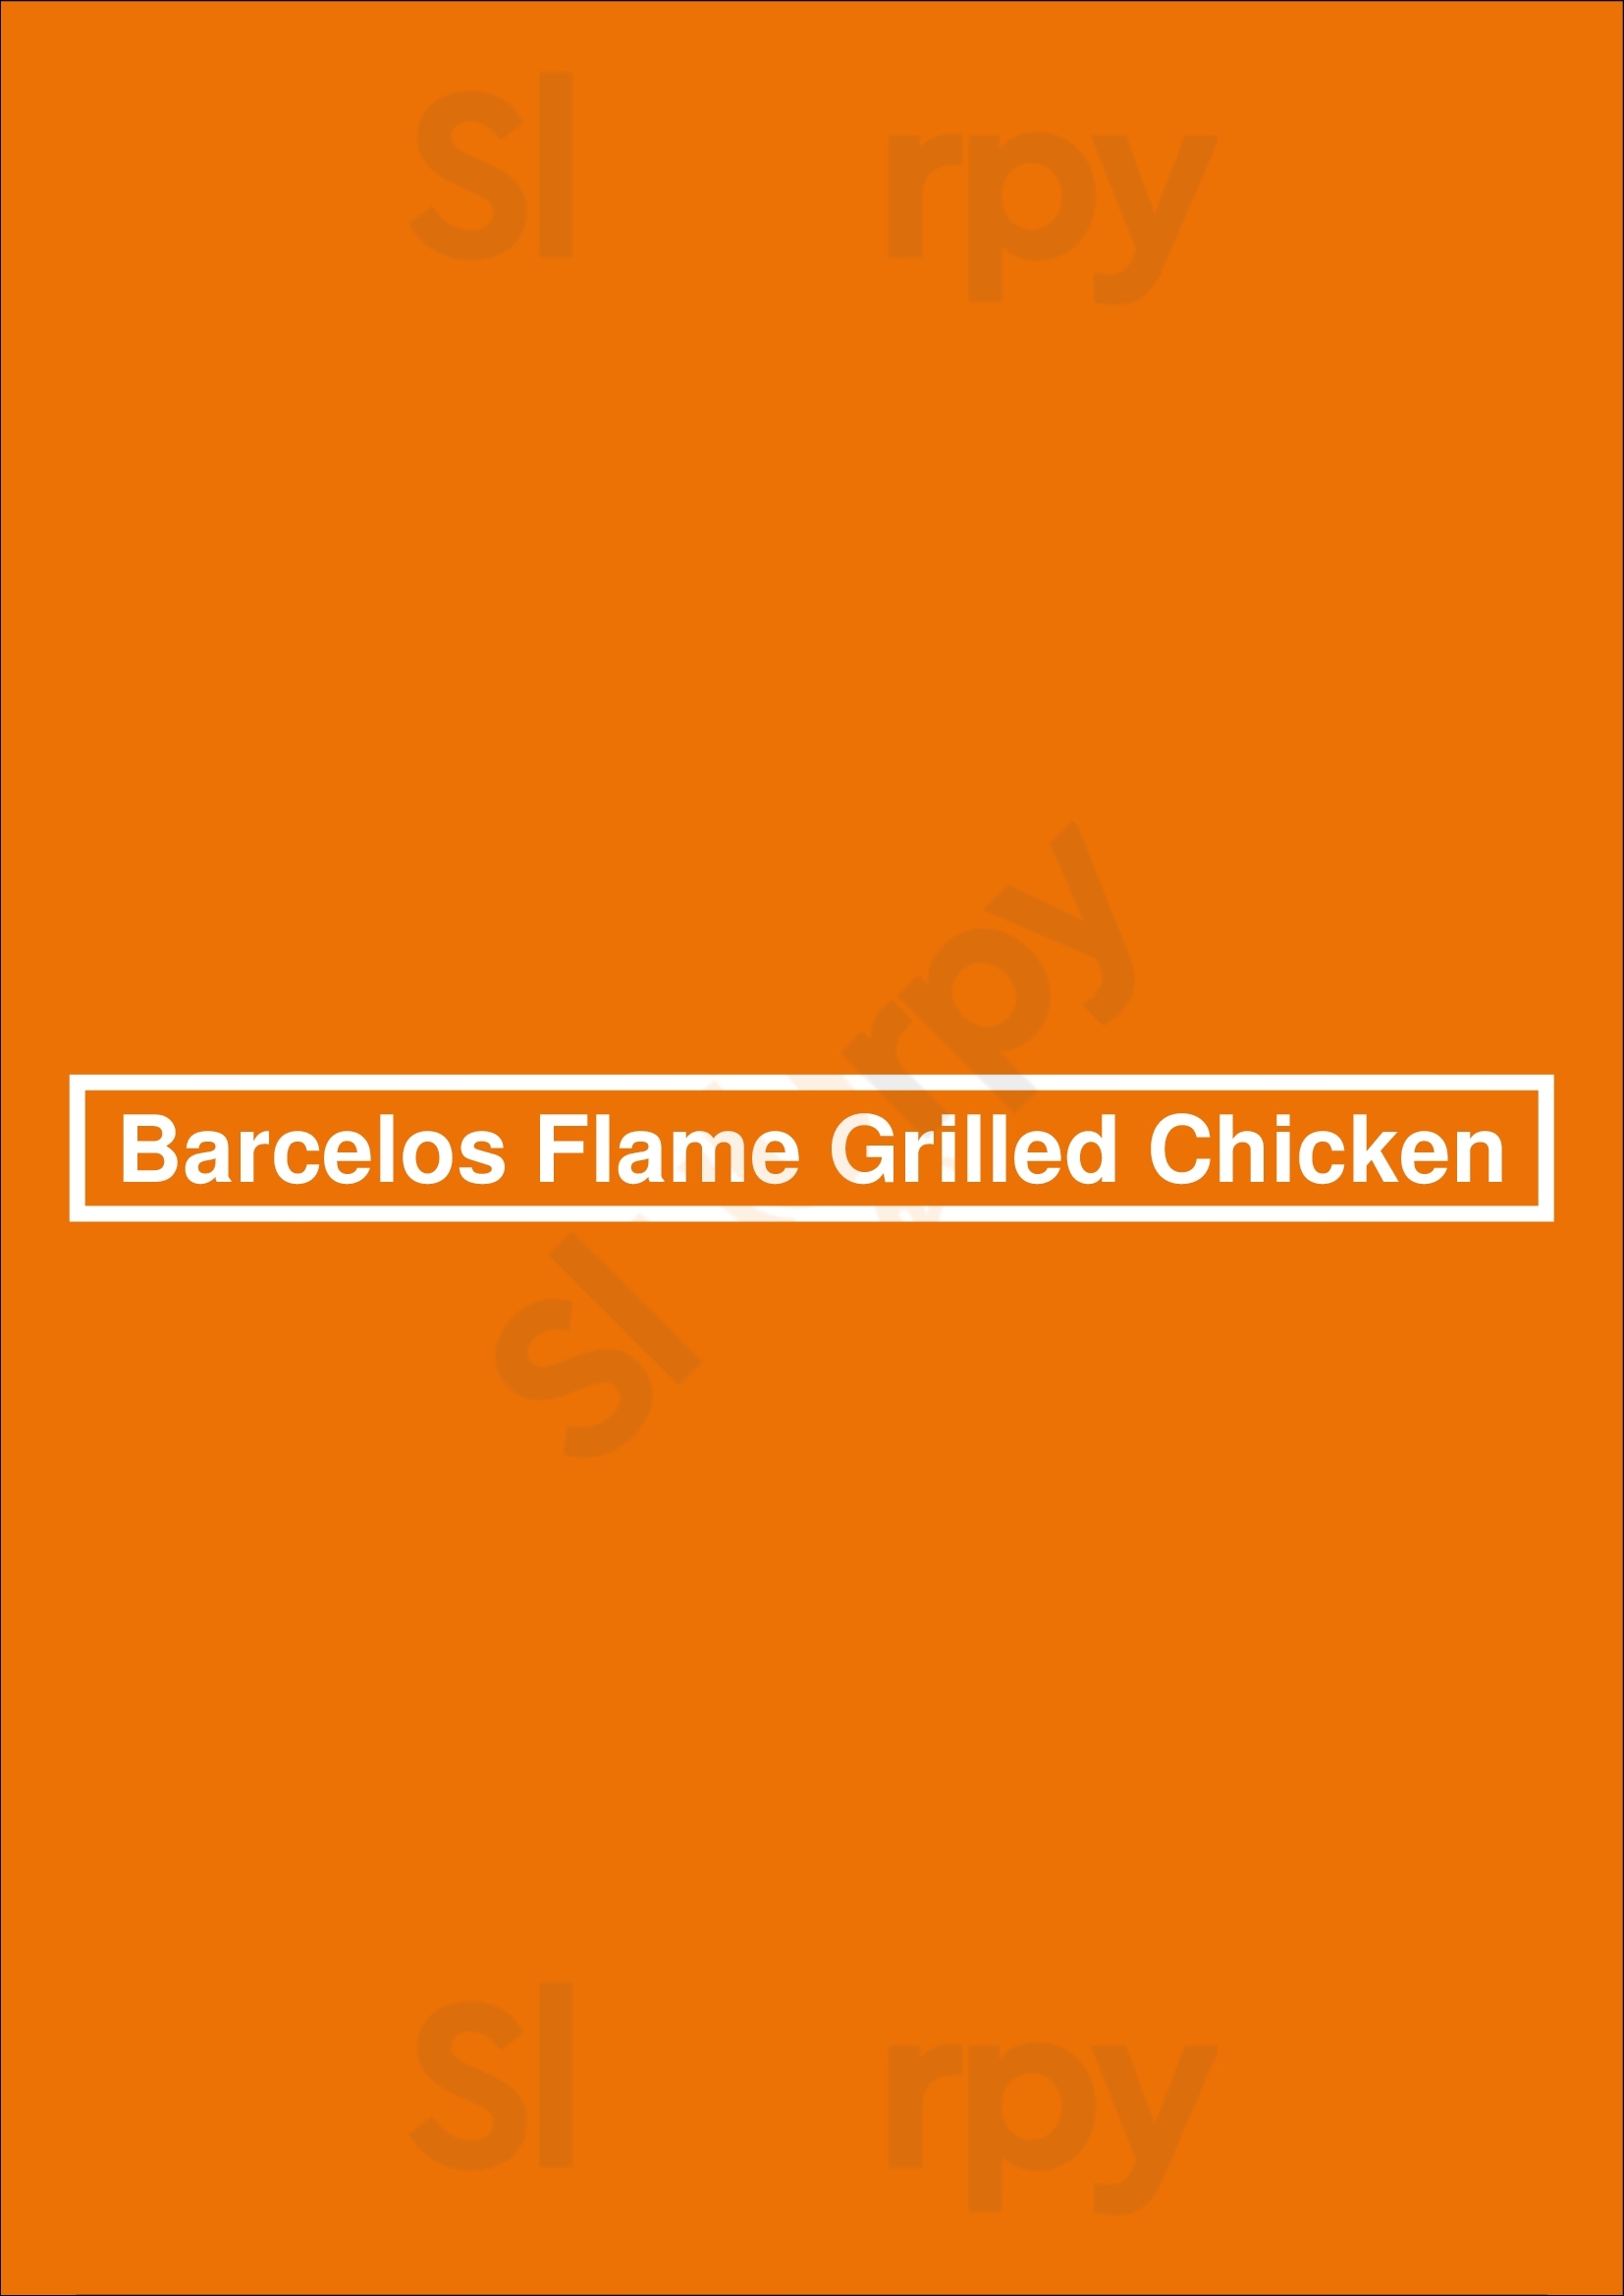 Barcelos Flame Grilled Chicken Burnaby Menu - 1